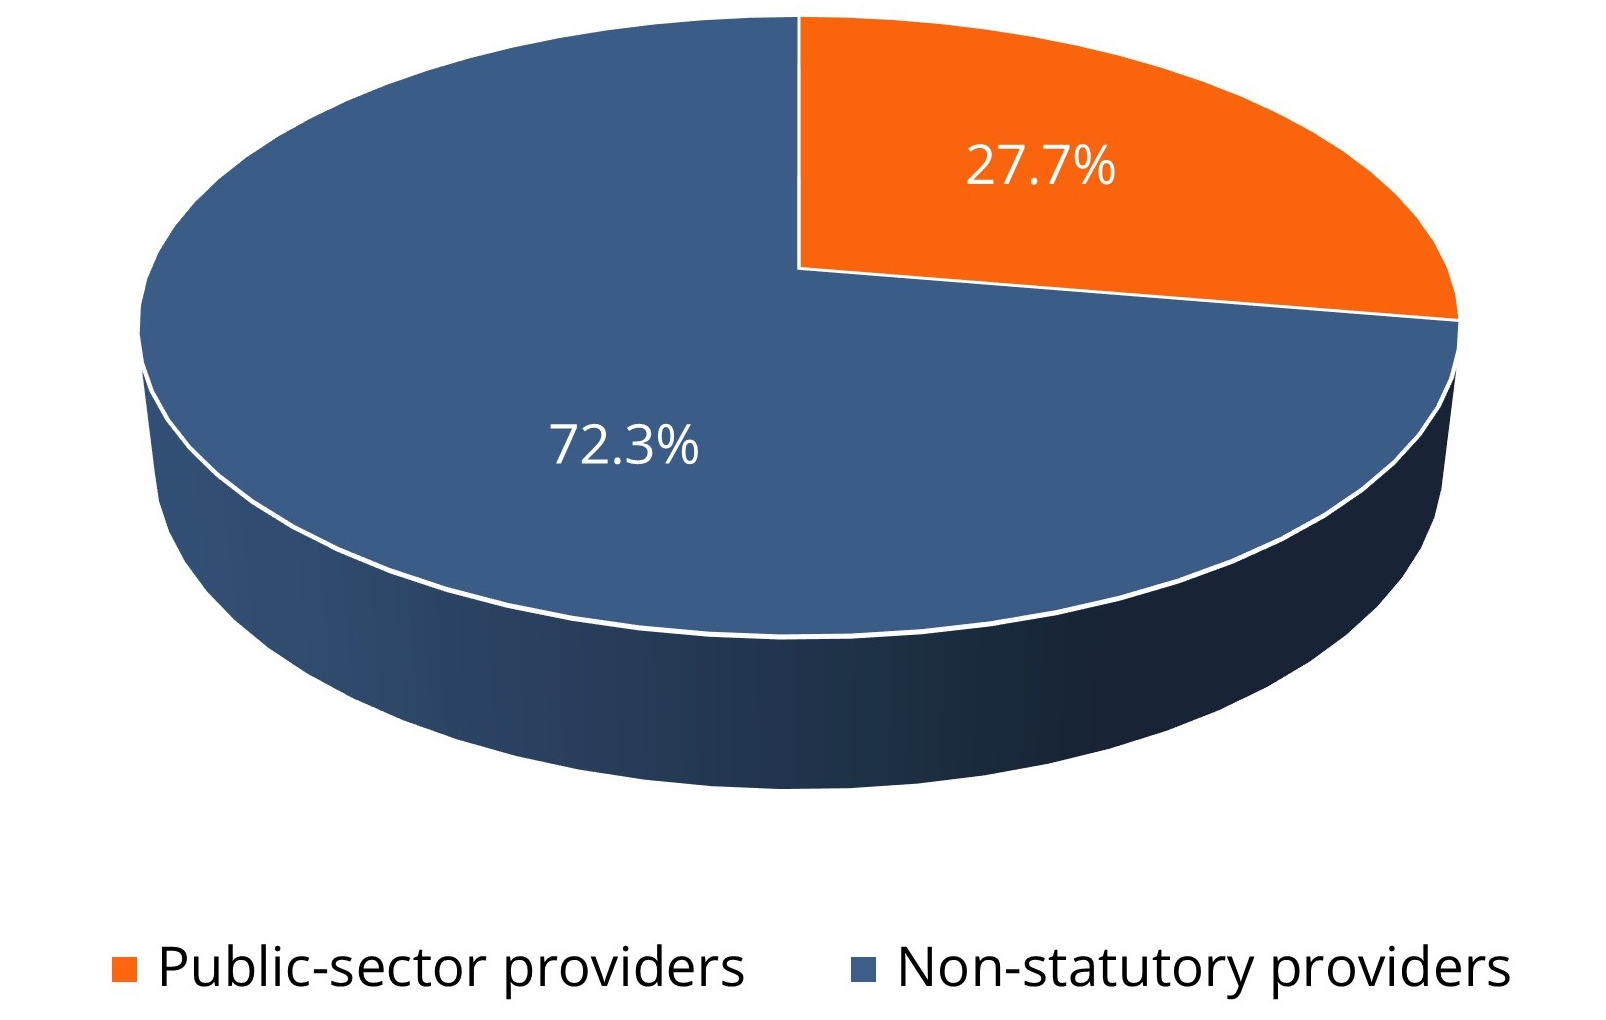 Pie chart on shares of public-sector / non-statutory providers in child and youth services (N = 98,108): Public-sector providers: 27.7%; non-statutory providers: 72.3%